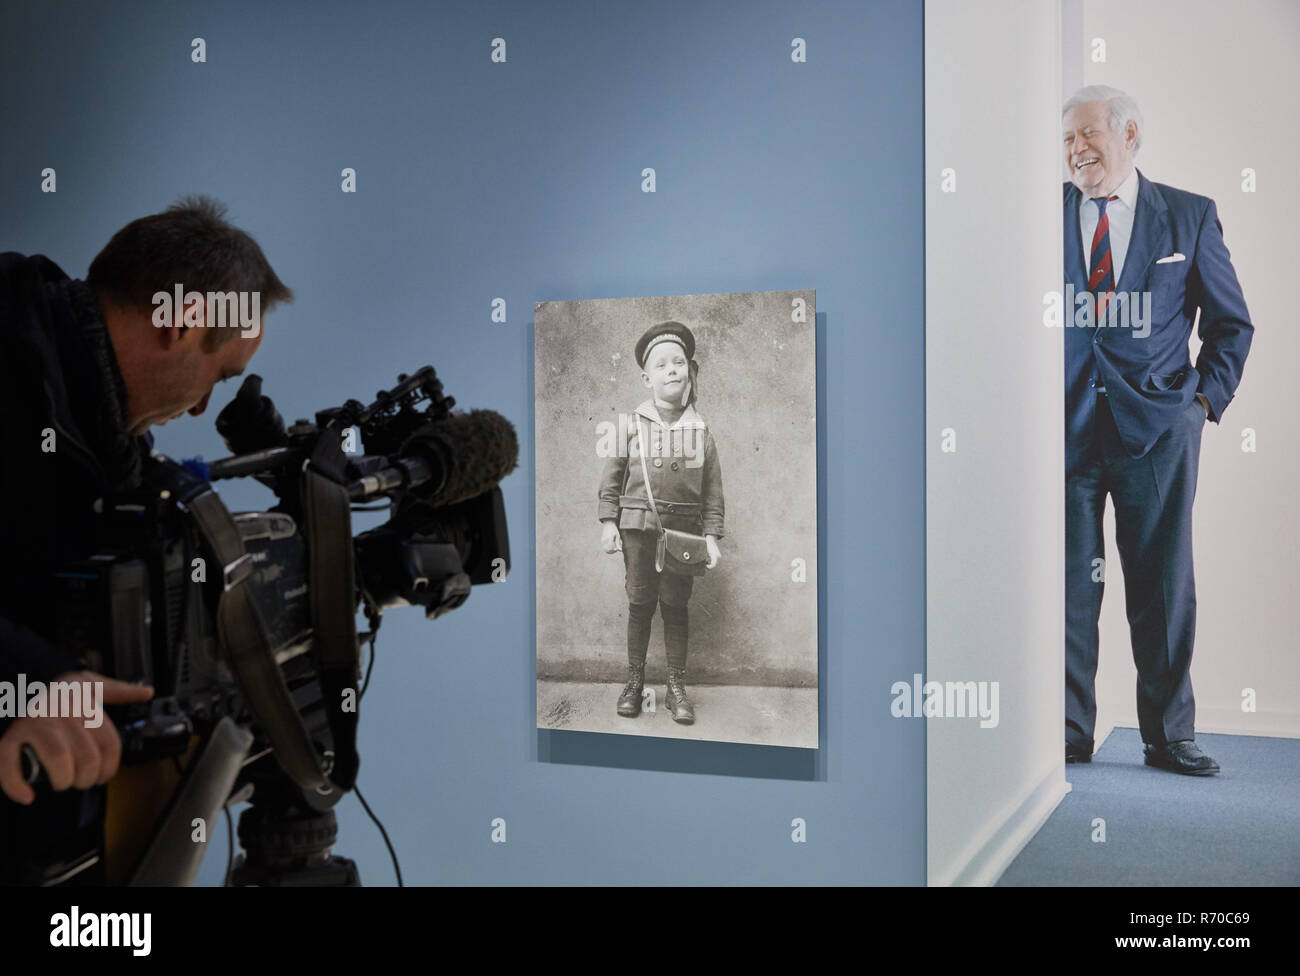 Hamburg, Germany. 06th Dec, 2018. A television cameraman films a photo from the Helmut-Schmidt-Archiv Hamburg of 1925 and a photo (r) by Uwe Aufderheide, Hamburg, 21 July 2000 at a preliminary appointment at Kattrepel 10 in the photo exhibition '100 Years in 100 Pictures' on the occasion of Helmut Schmidt's 100th birthday. Credit: Georg Wendt/dpa/Alamy Live News Stock Photo